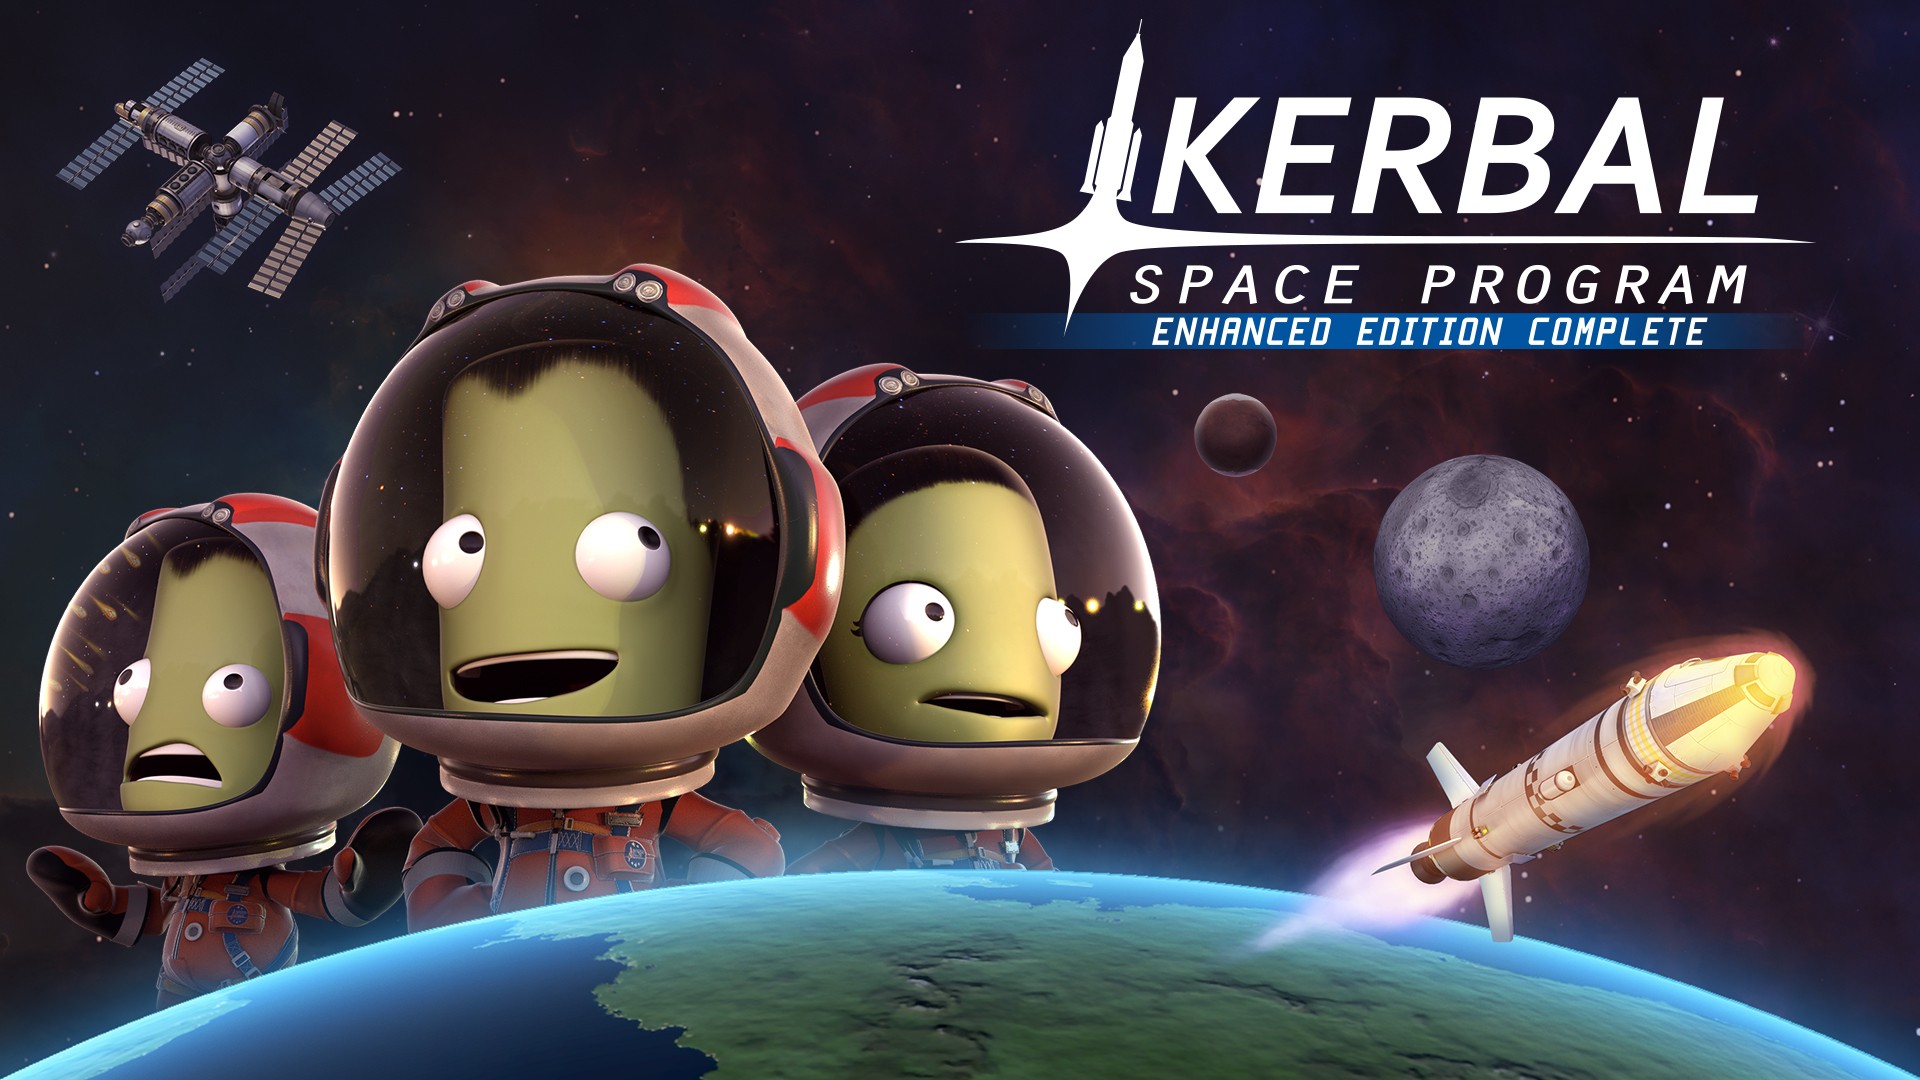 Kerbal Space Program Enhanced Edition Complete Out Now On Consoles